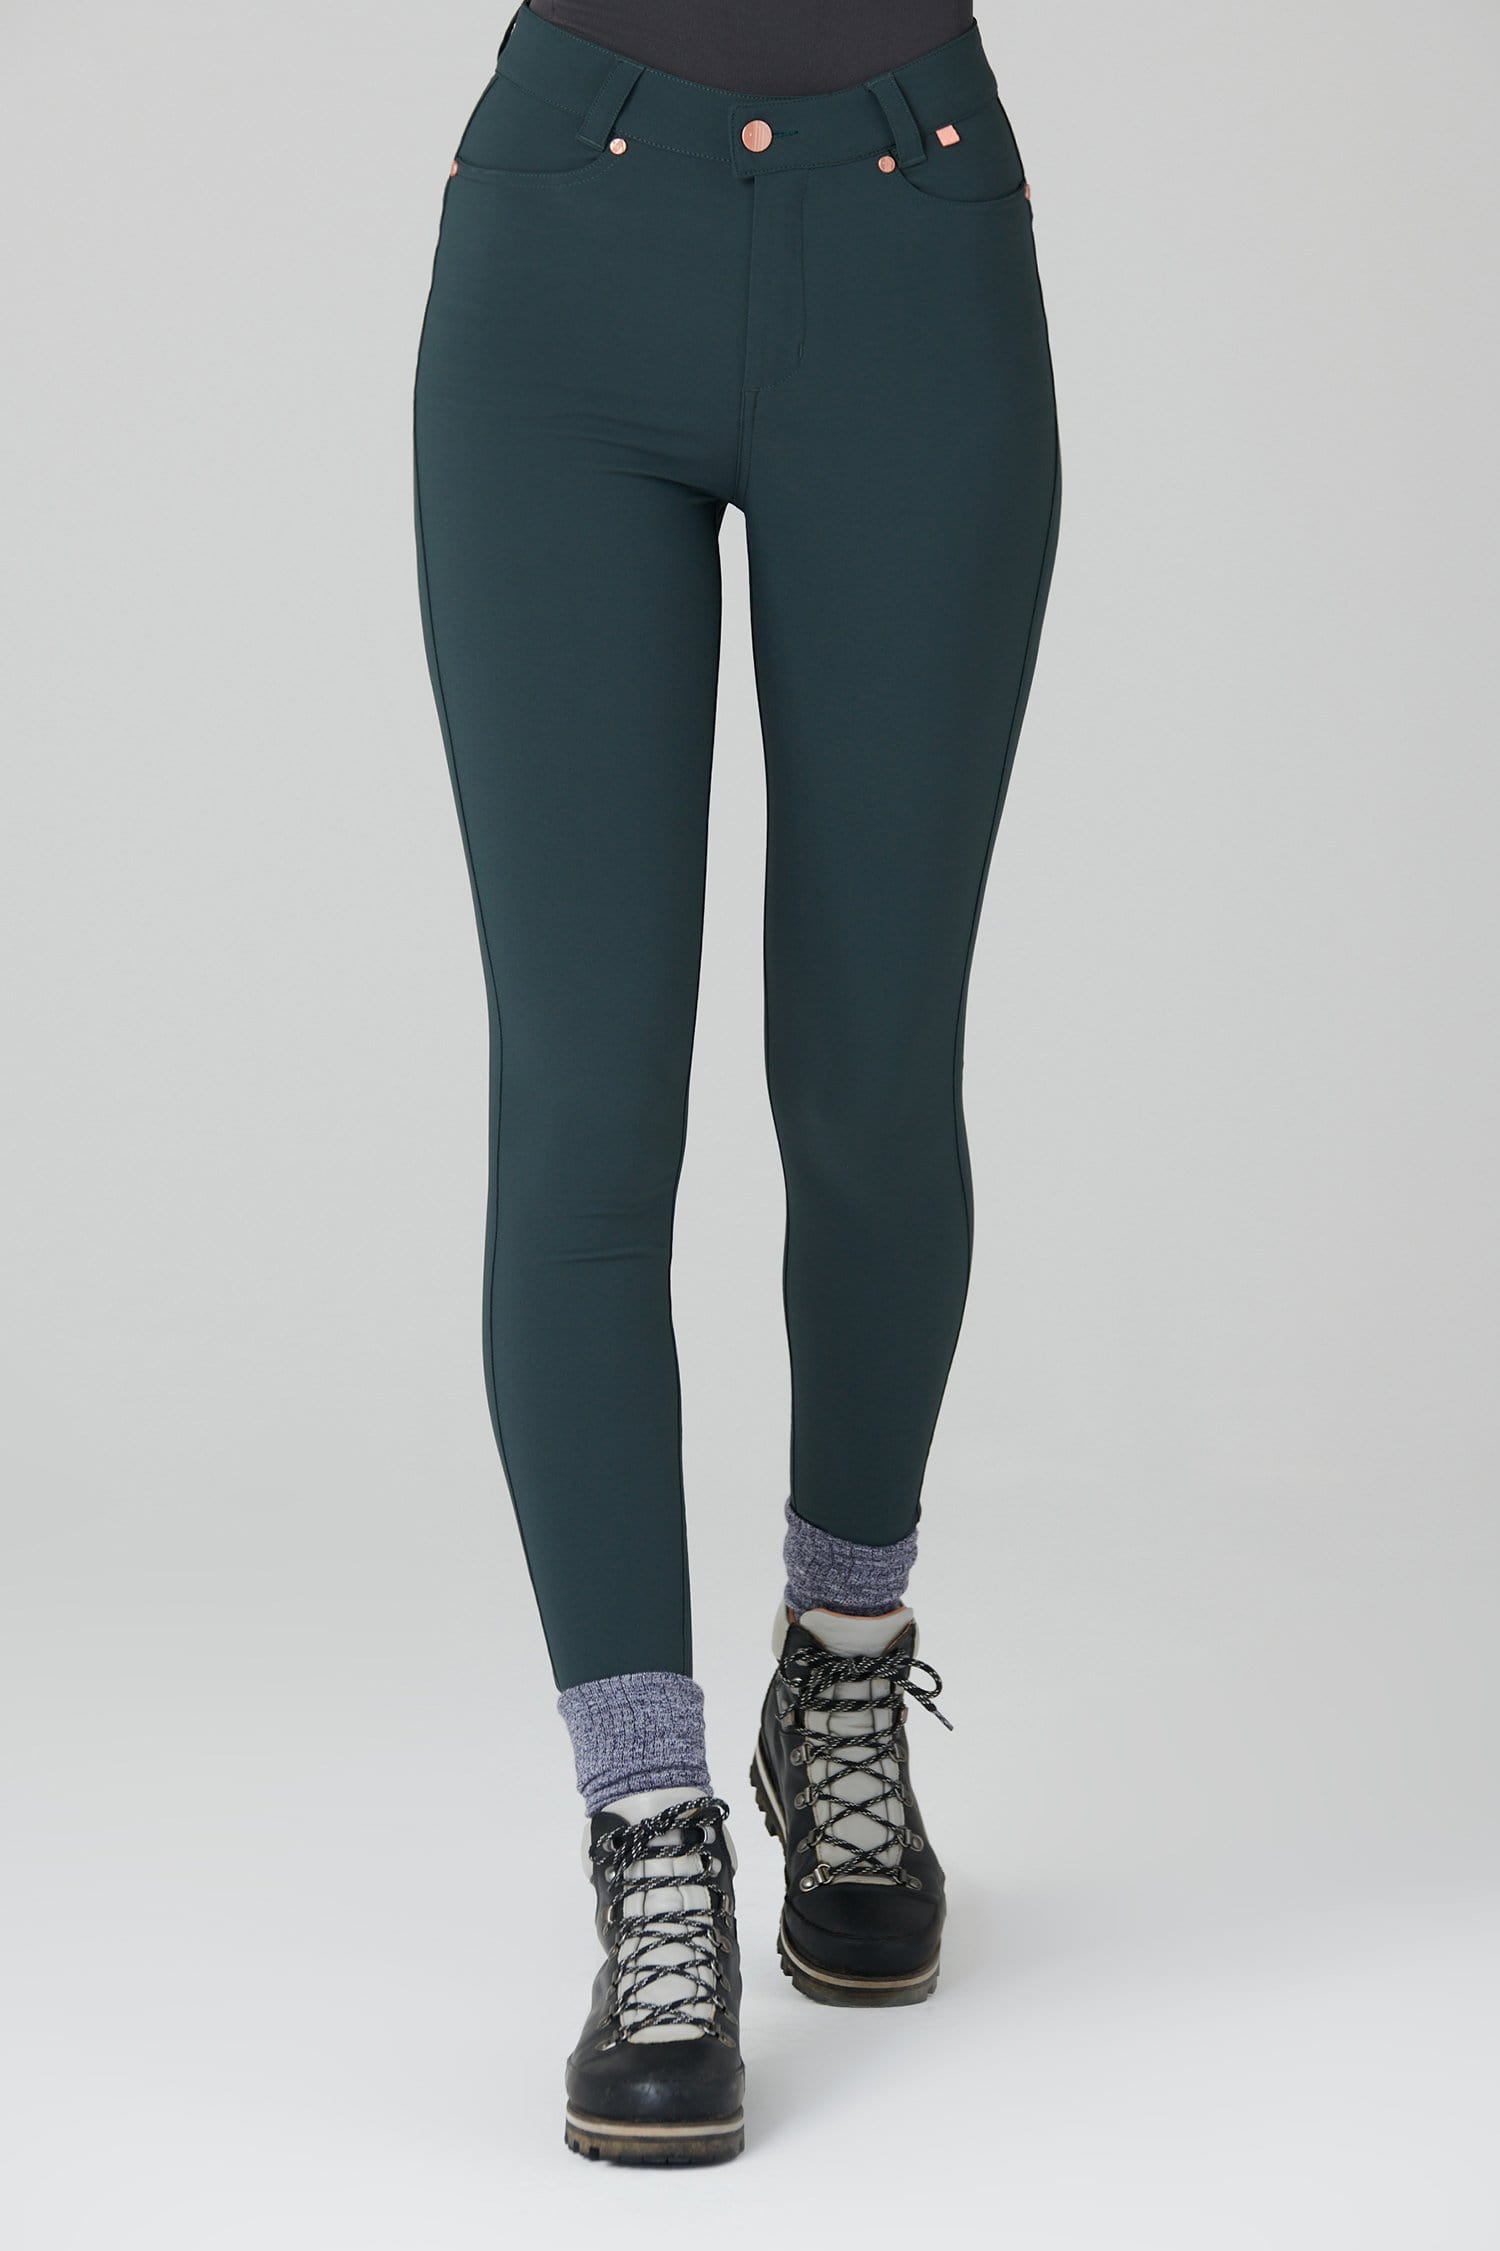 Thermal Skinny Outdoor Trousers - Forest Green - 32p / Uk14 - Womens - Acai Outdoorwear